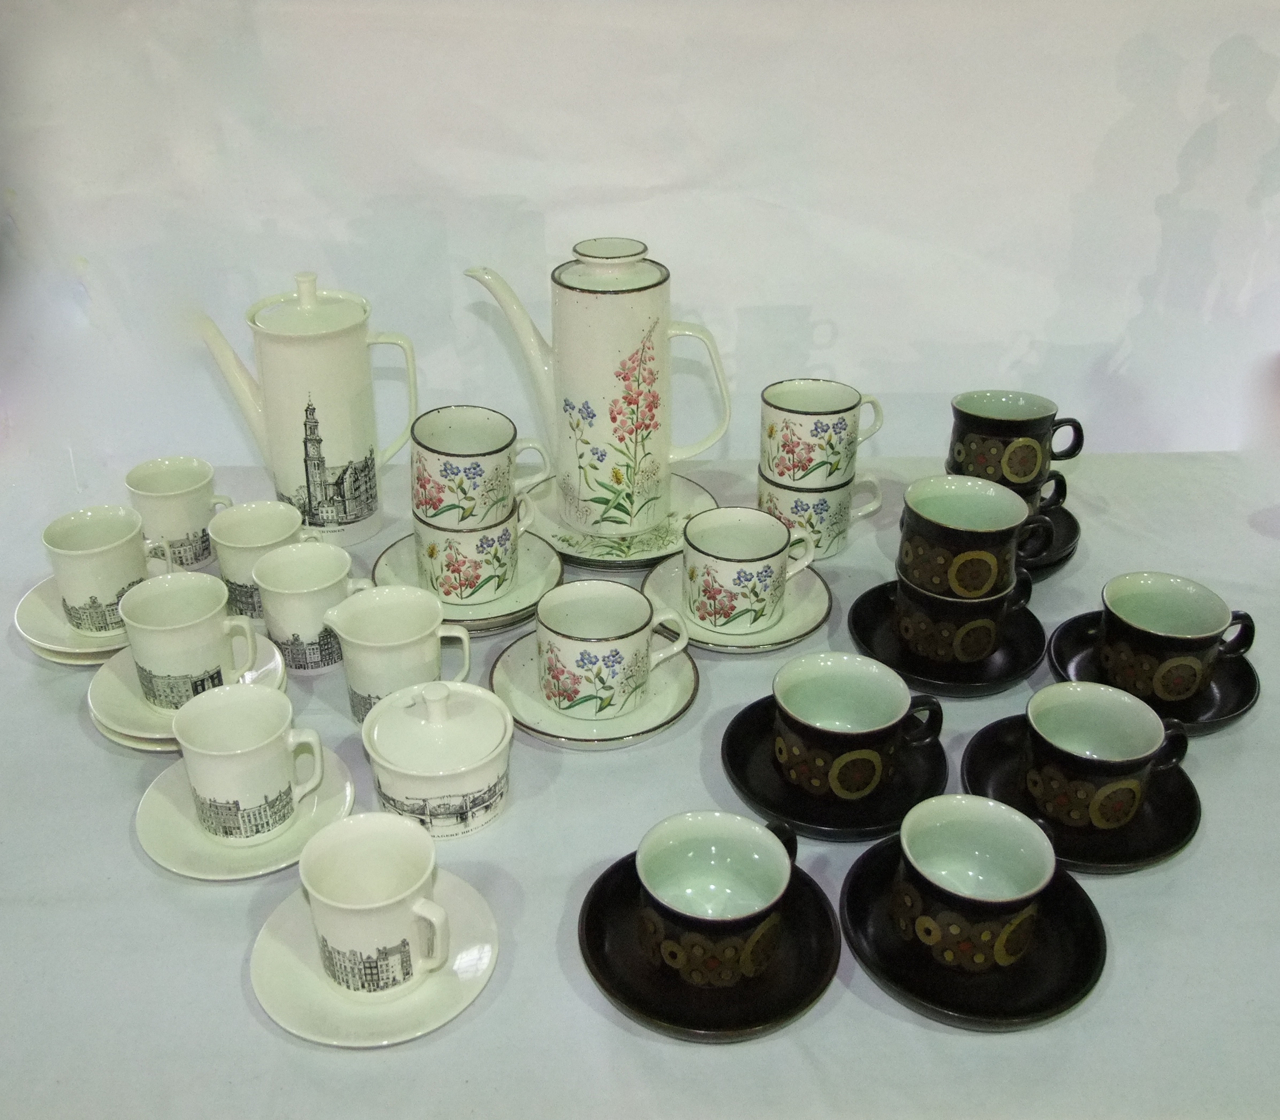 A collection of Villeroy & Boch coffee wares with black printed topographical detail on a cream